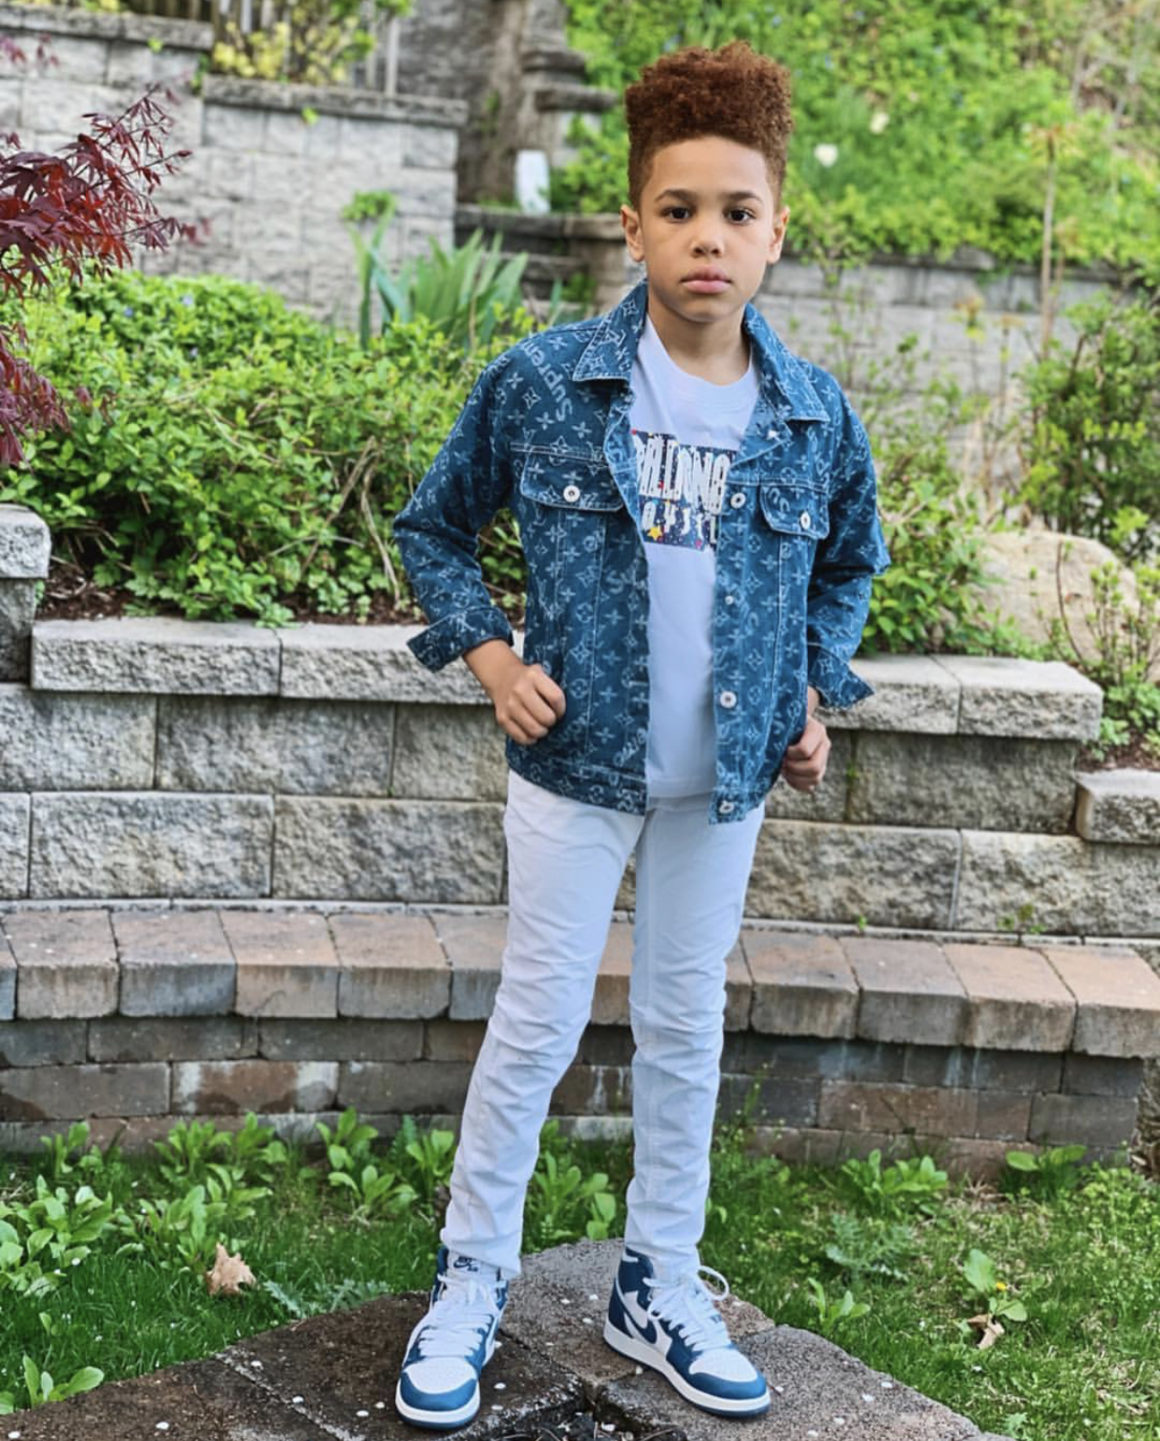 The Most Fashionable Kids of 2019: North West, Kulture, Blue Ivy Carter ...